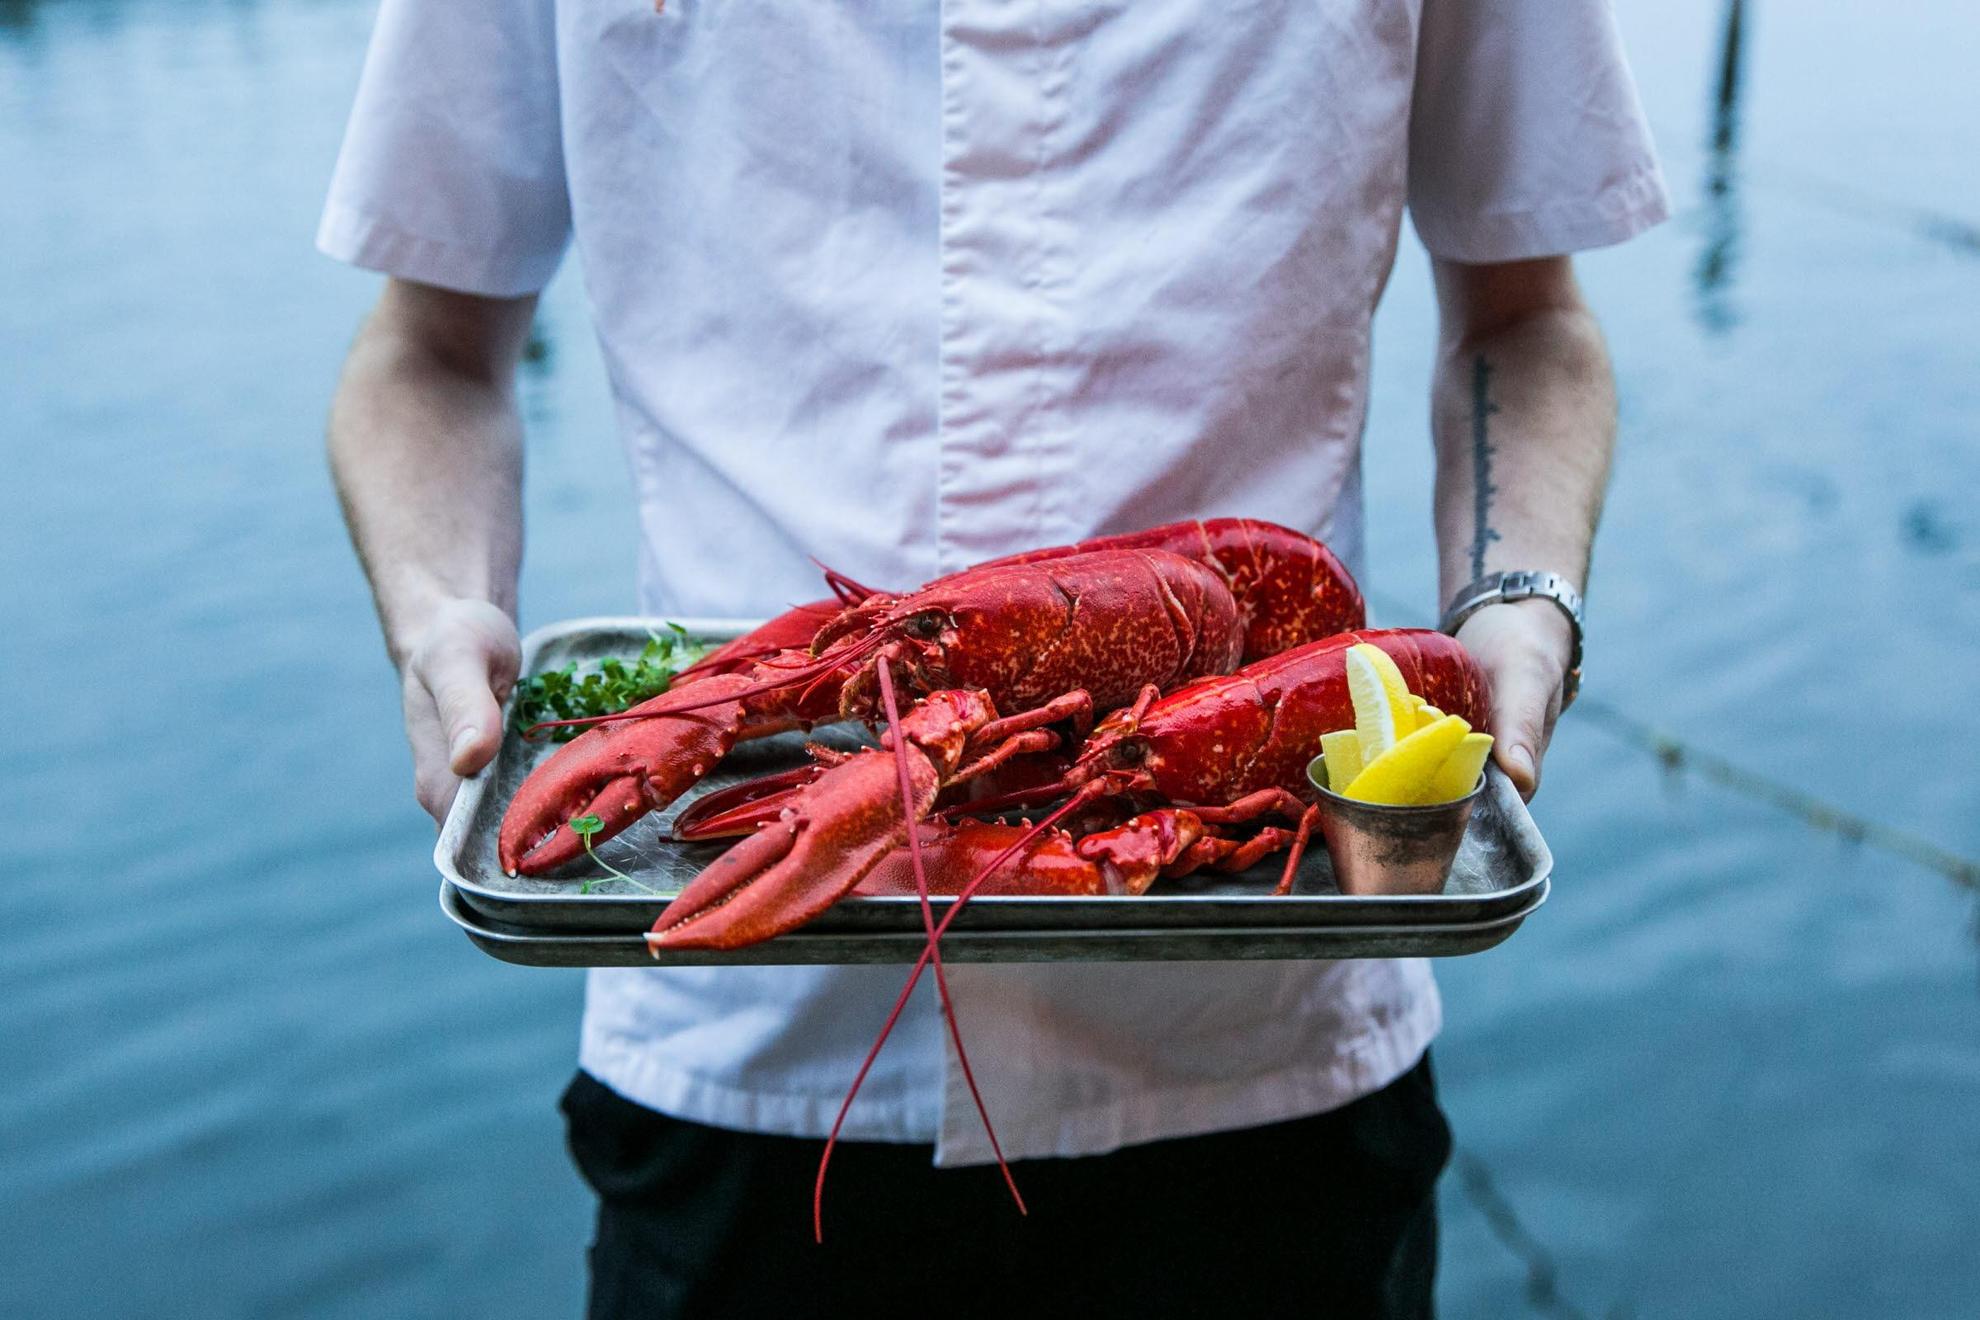 A person in chef clothes, standing by the sea while holding a tray with a large lobster and slices of lemon.